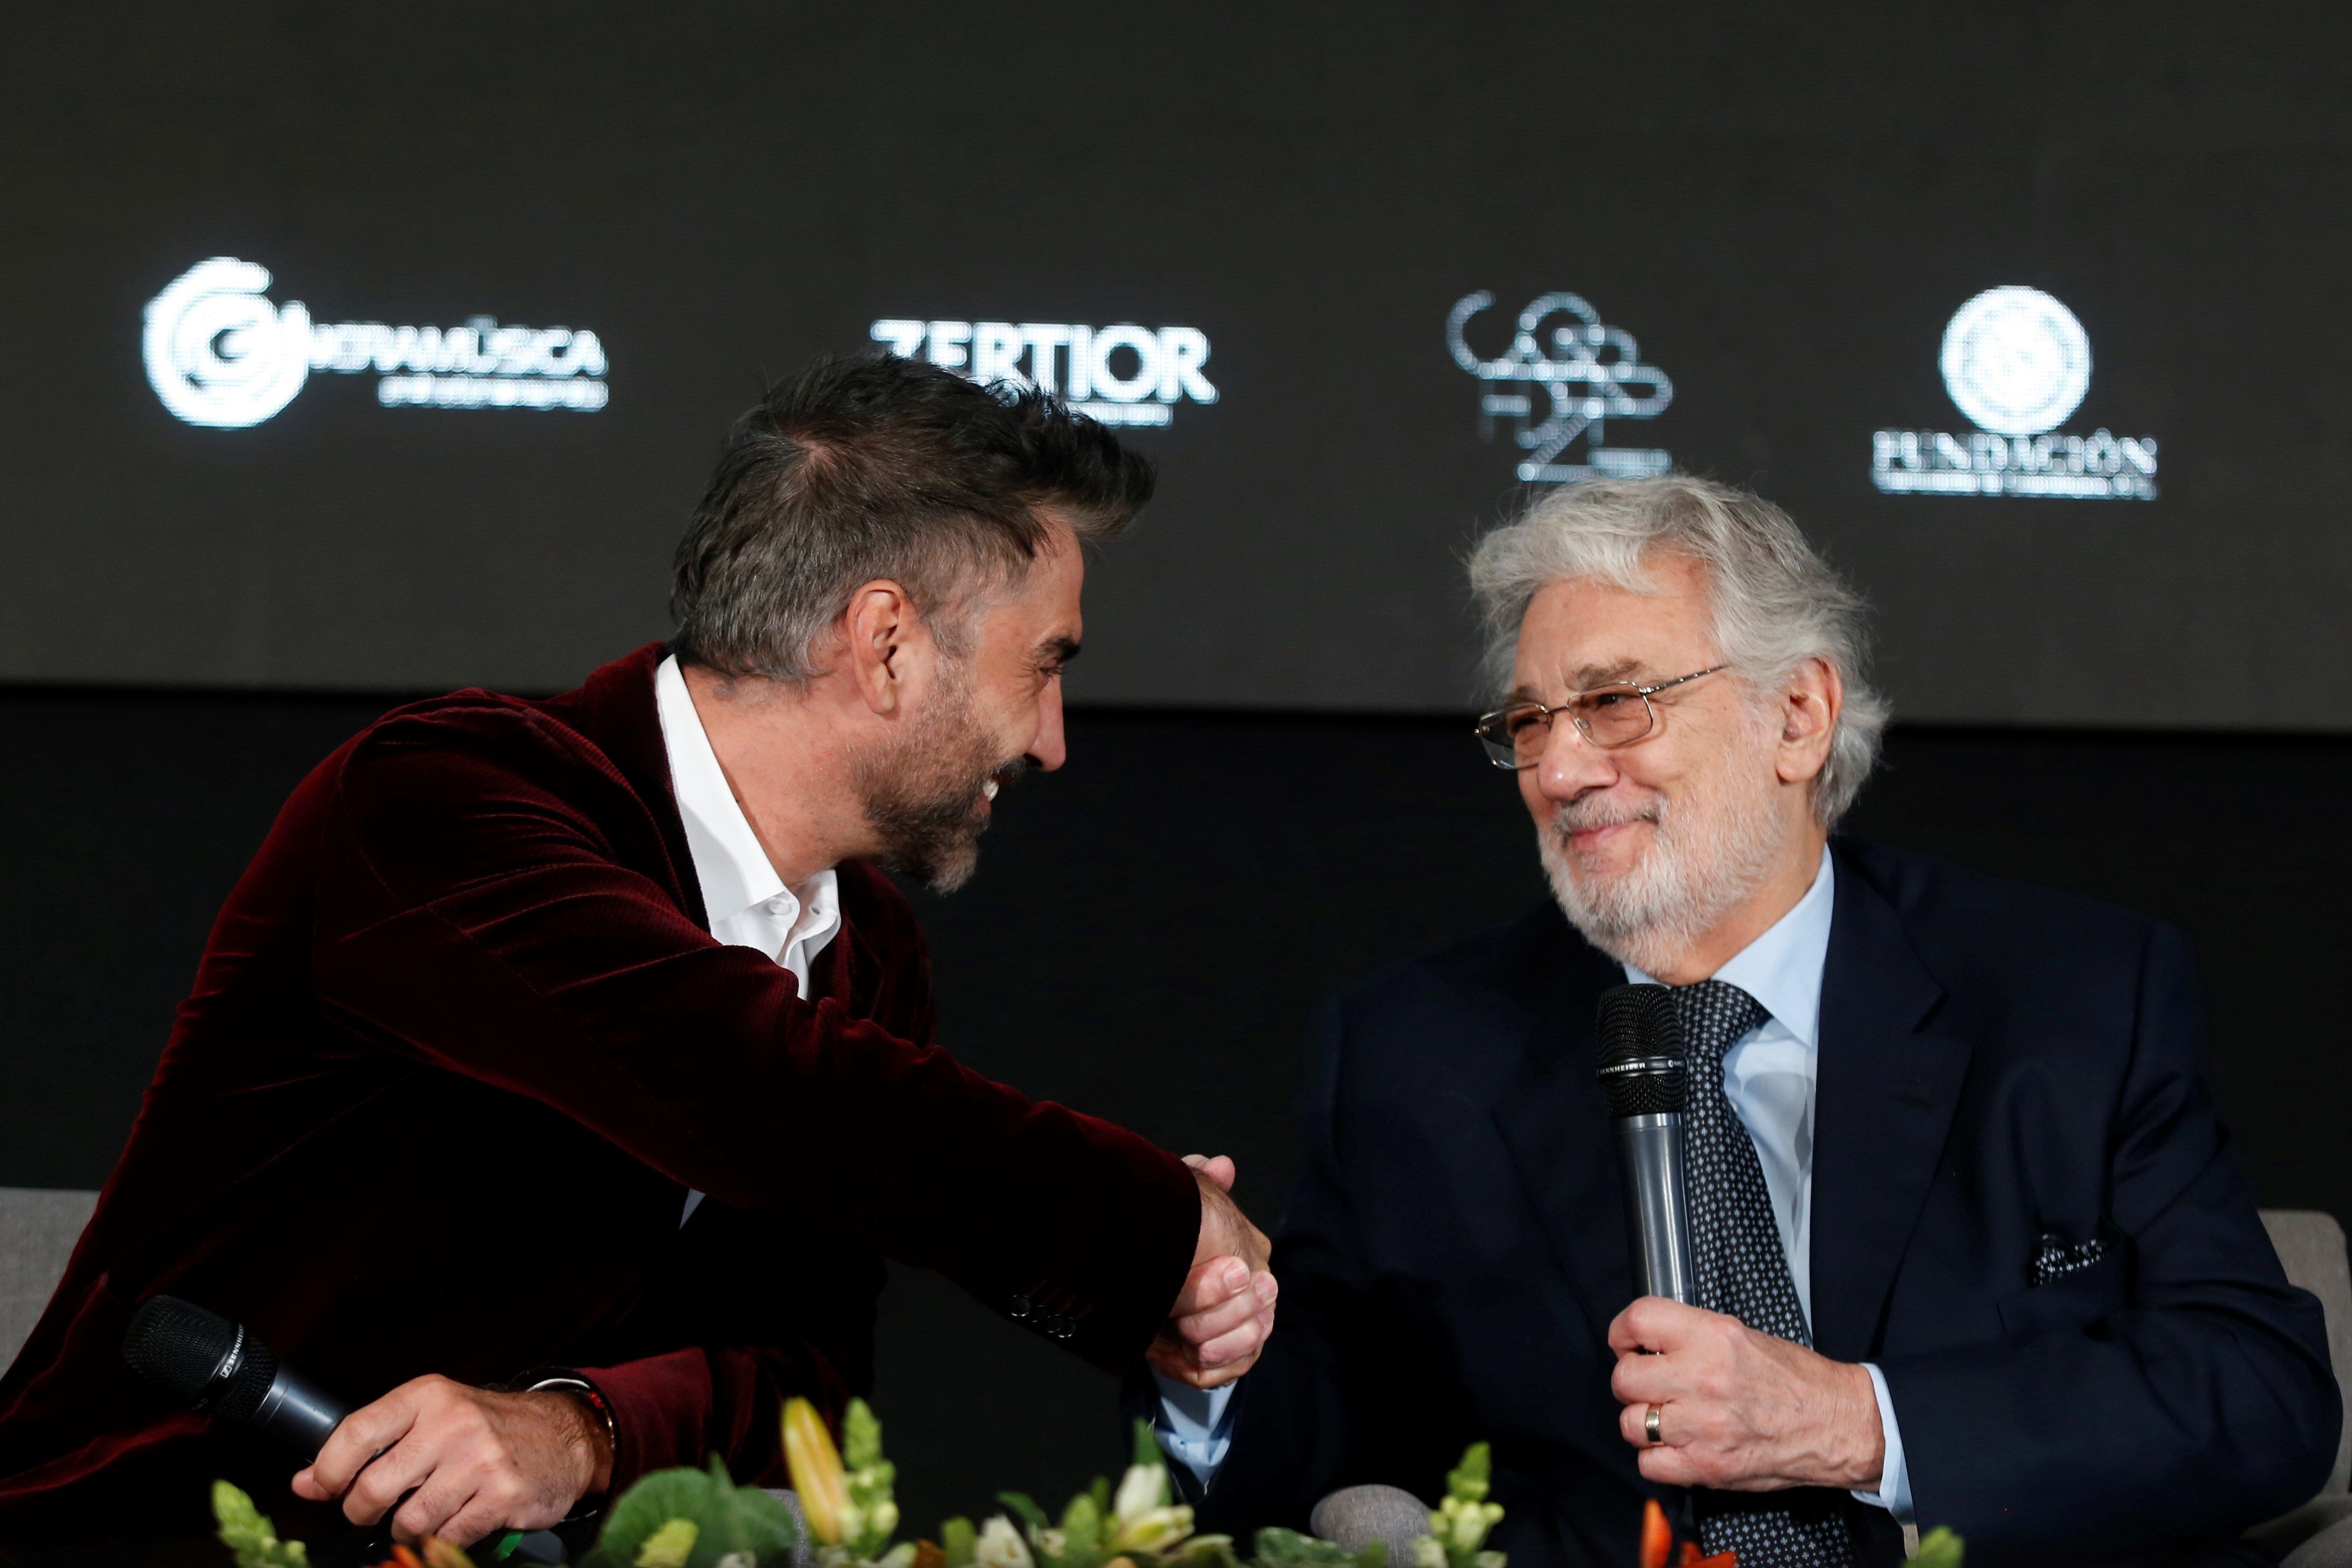 Spanish tenor Placido Domingo (R) and Mexican singer Alejandro Fernandez (L) hold a joint press conference, in Guadalajara, Mexico, 03 December 2018. Placido Domingo announced a charity concert to raise funds for education projects in Mexico through the Real Madrid Foundation. EFE-EPA/ Francisco Guasco
